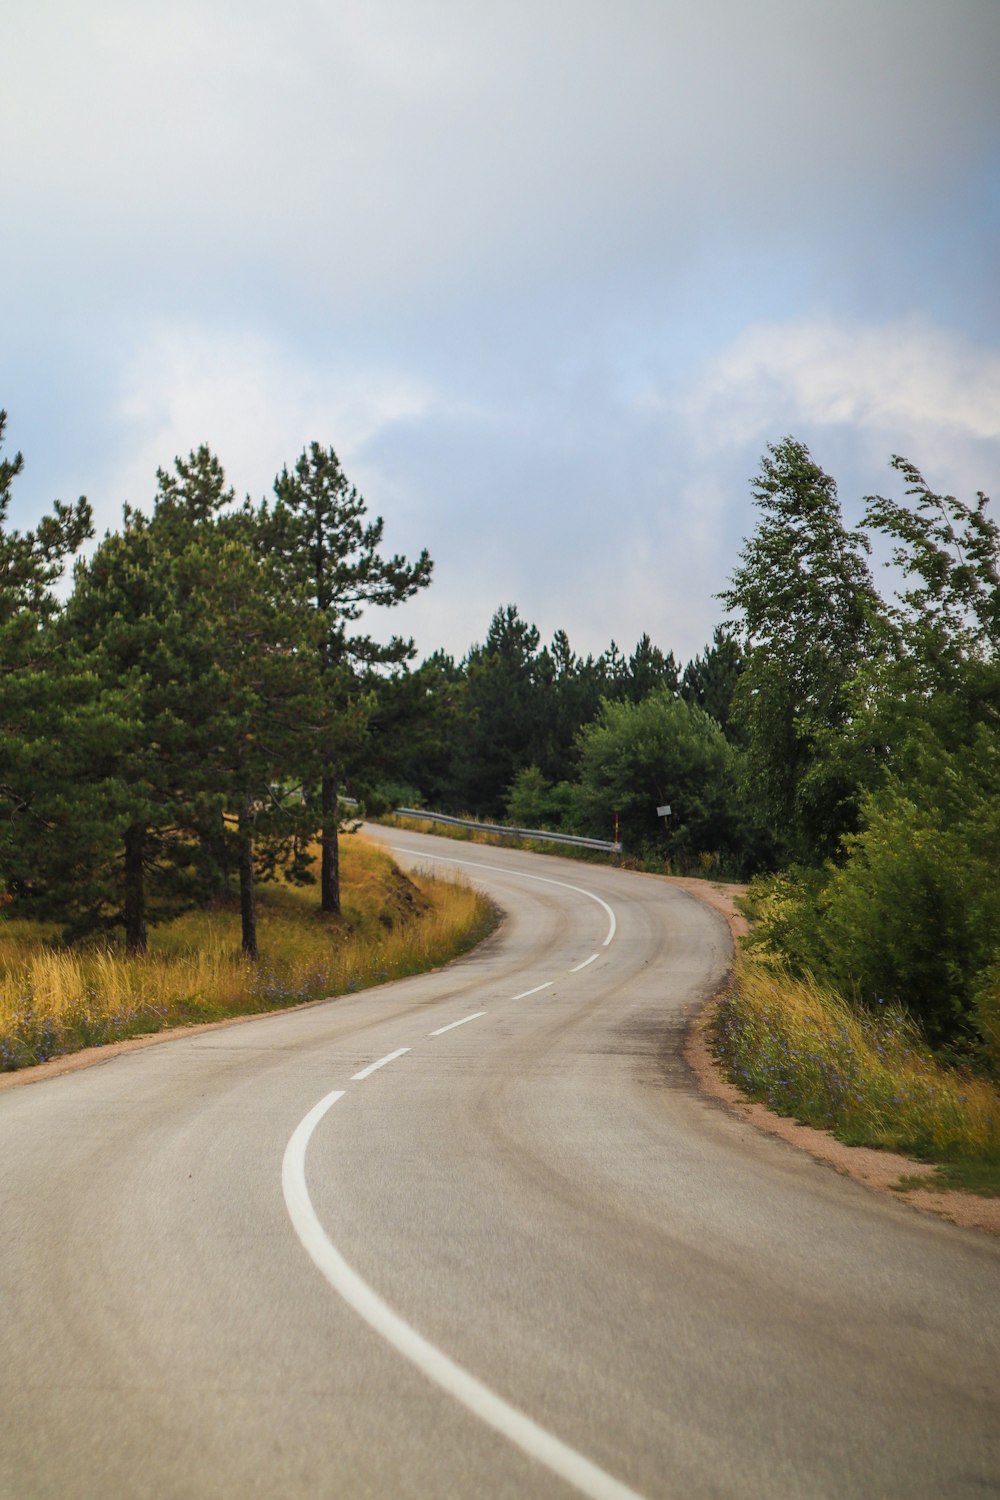 a curved road with trees on both sides